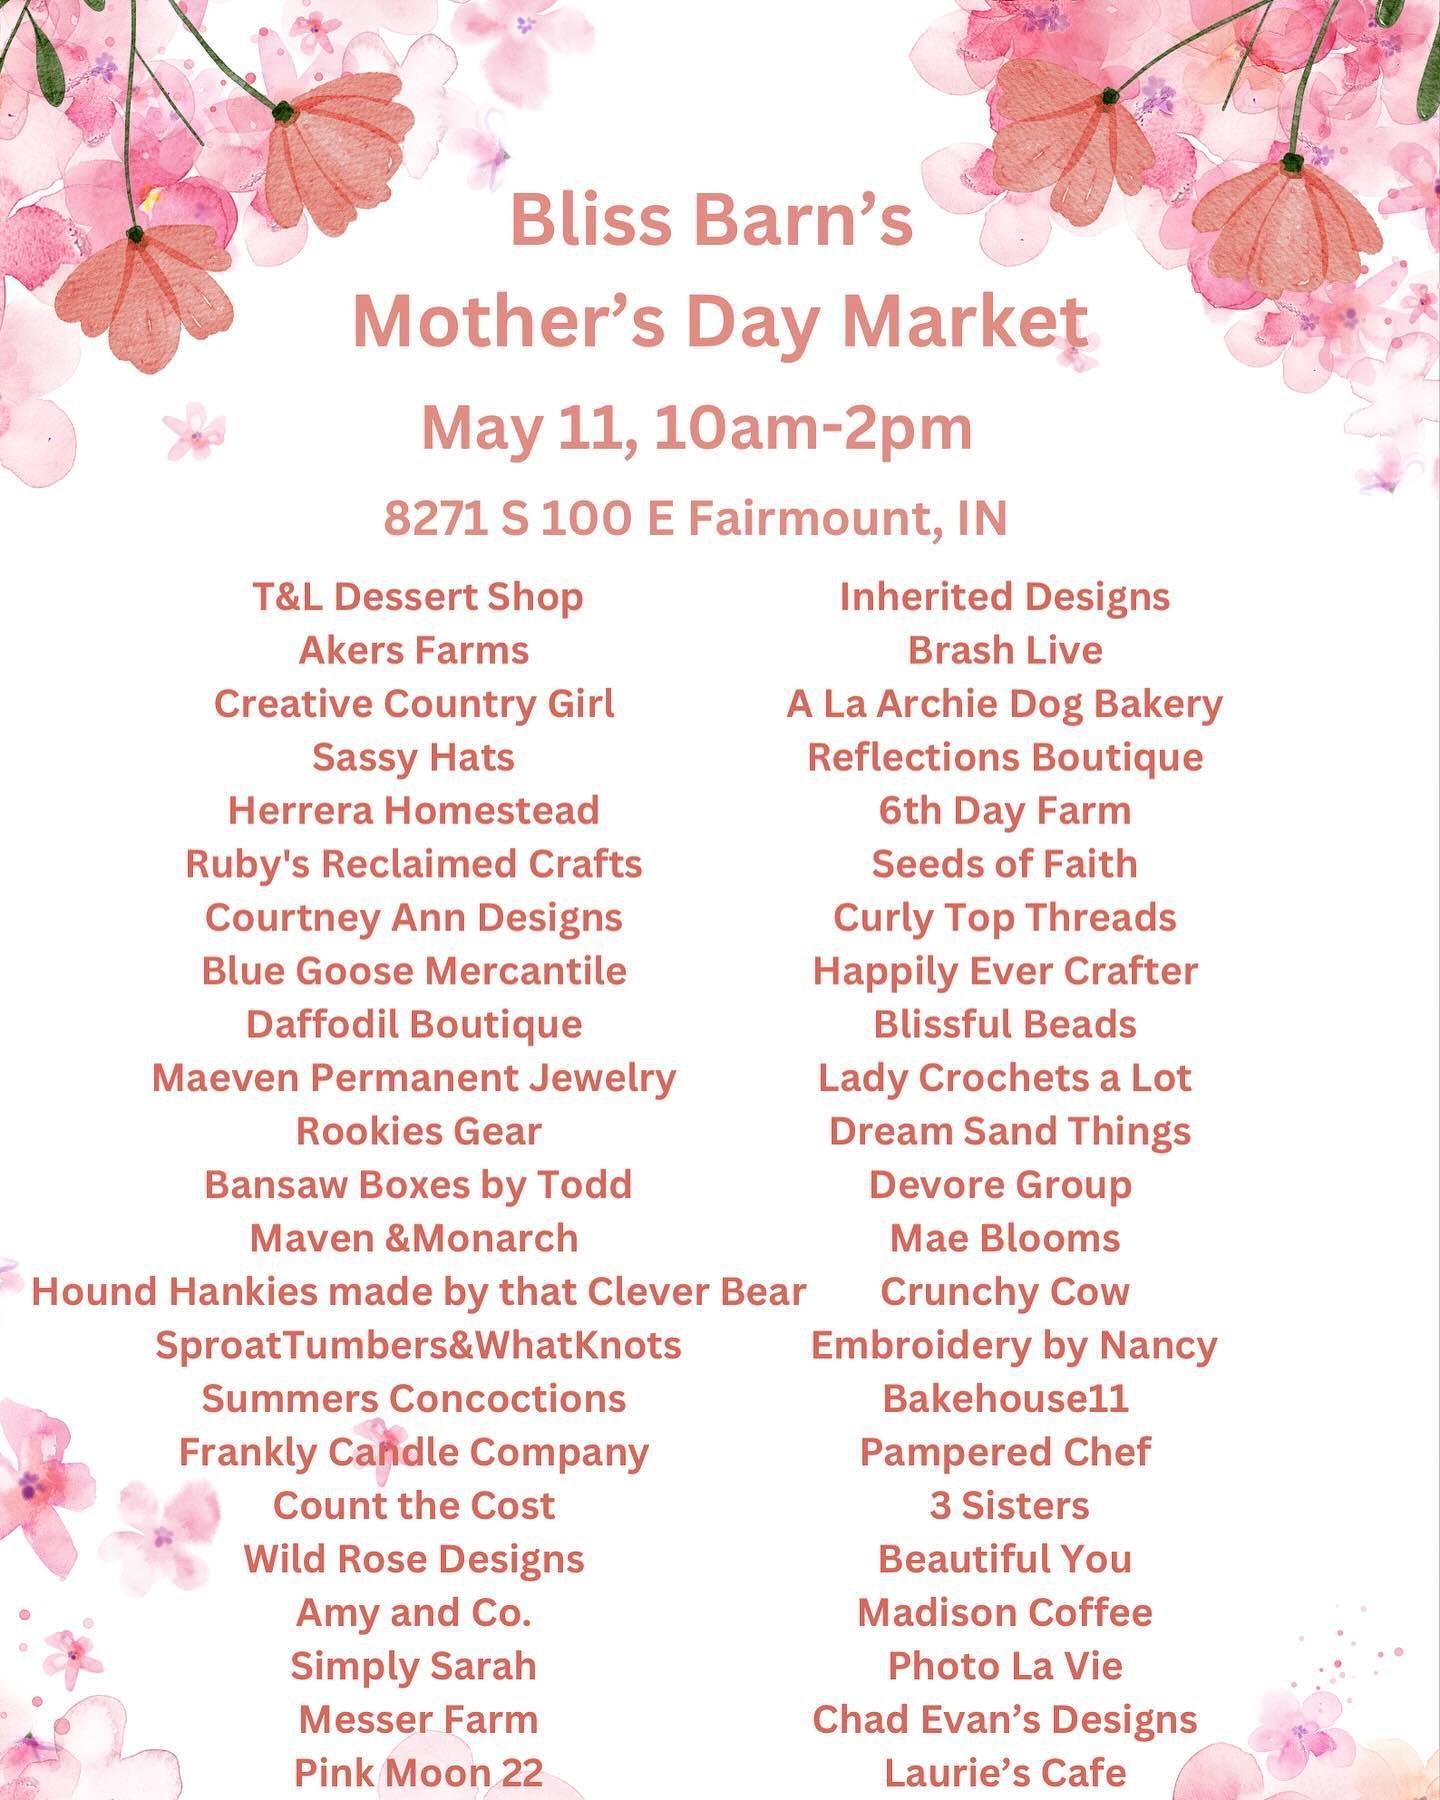 We are officially two weeks out from our market! Join us on Saturday May 11th 10am - 2pm for our Mother&rsquo;s Day Market. We have 50 vendors showcasing their handmade items, jewelry, baked goods, boutique items and more! 

Be sure to grab a coffee 